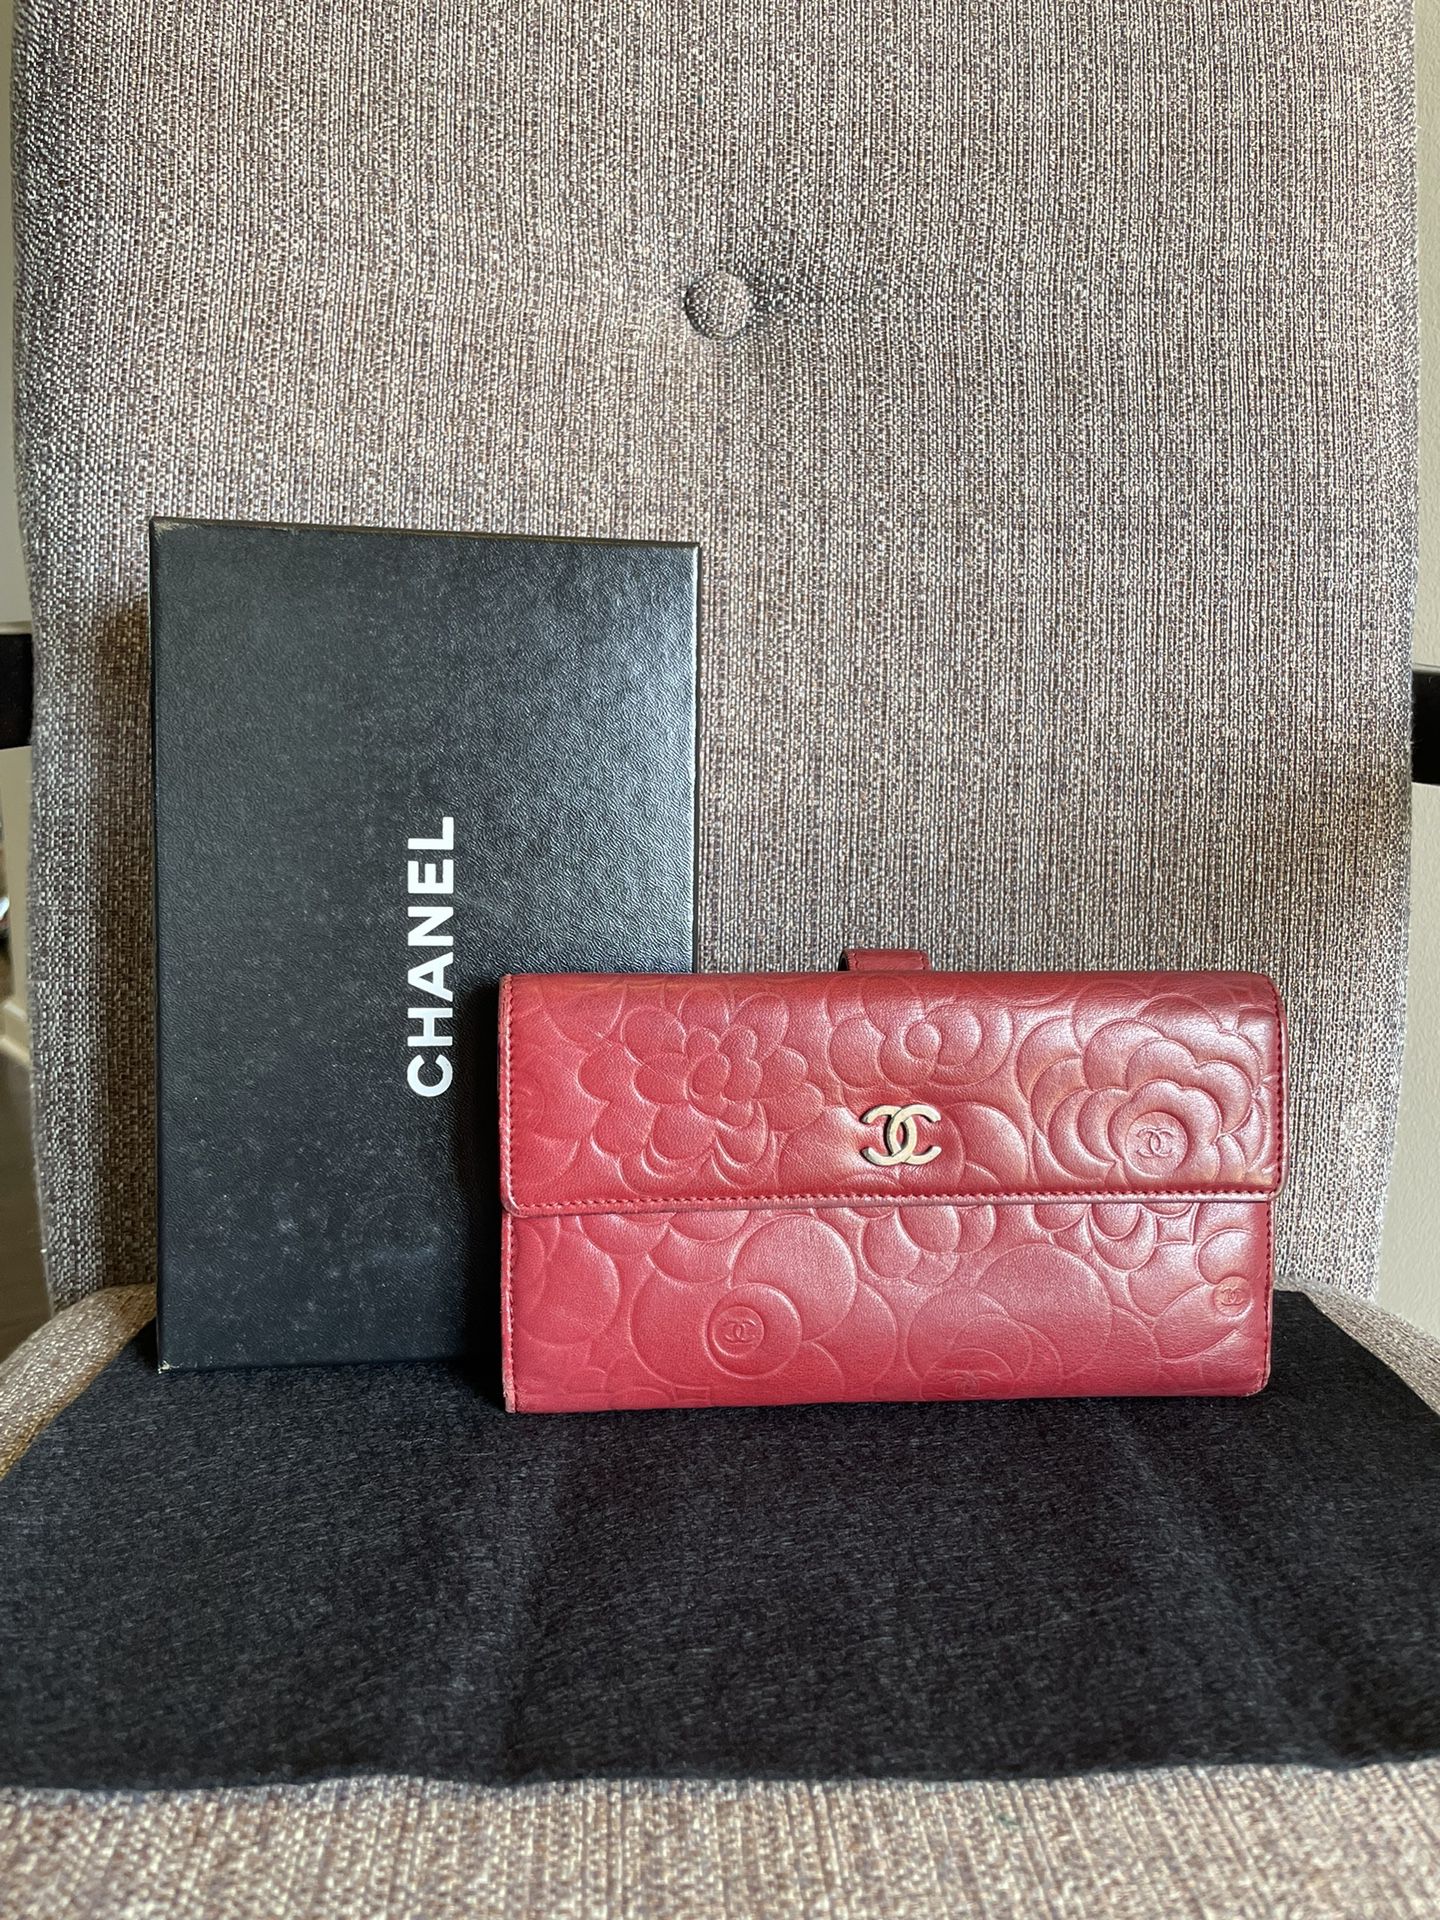 Authentic Chanel Wallet for Sale in Hiram, GA - OfferUp